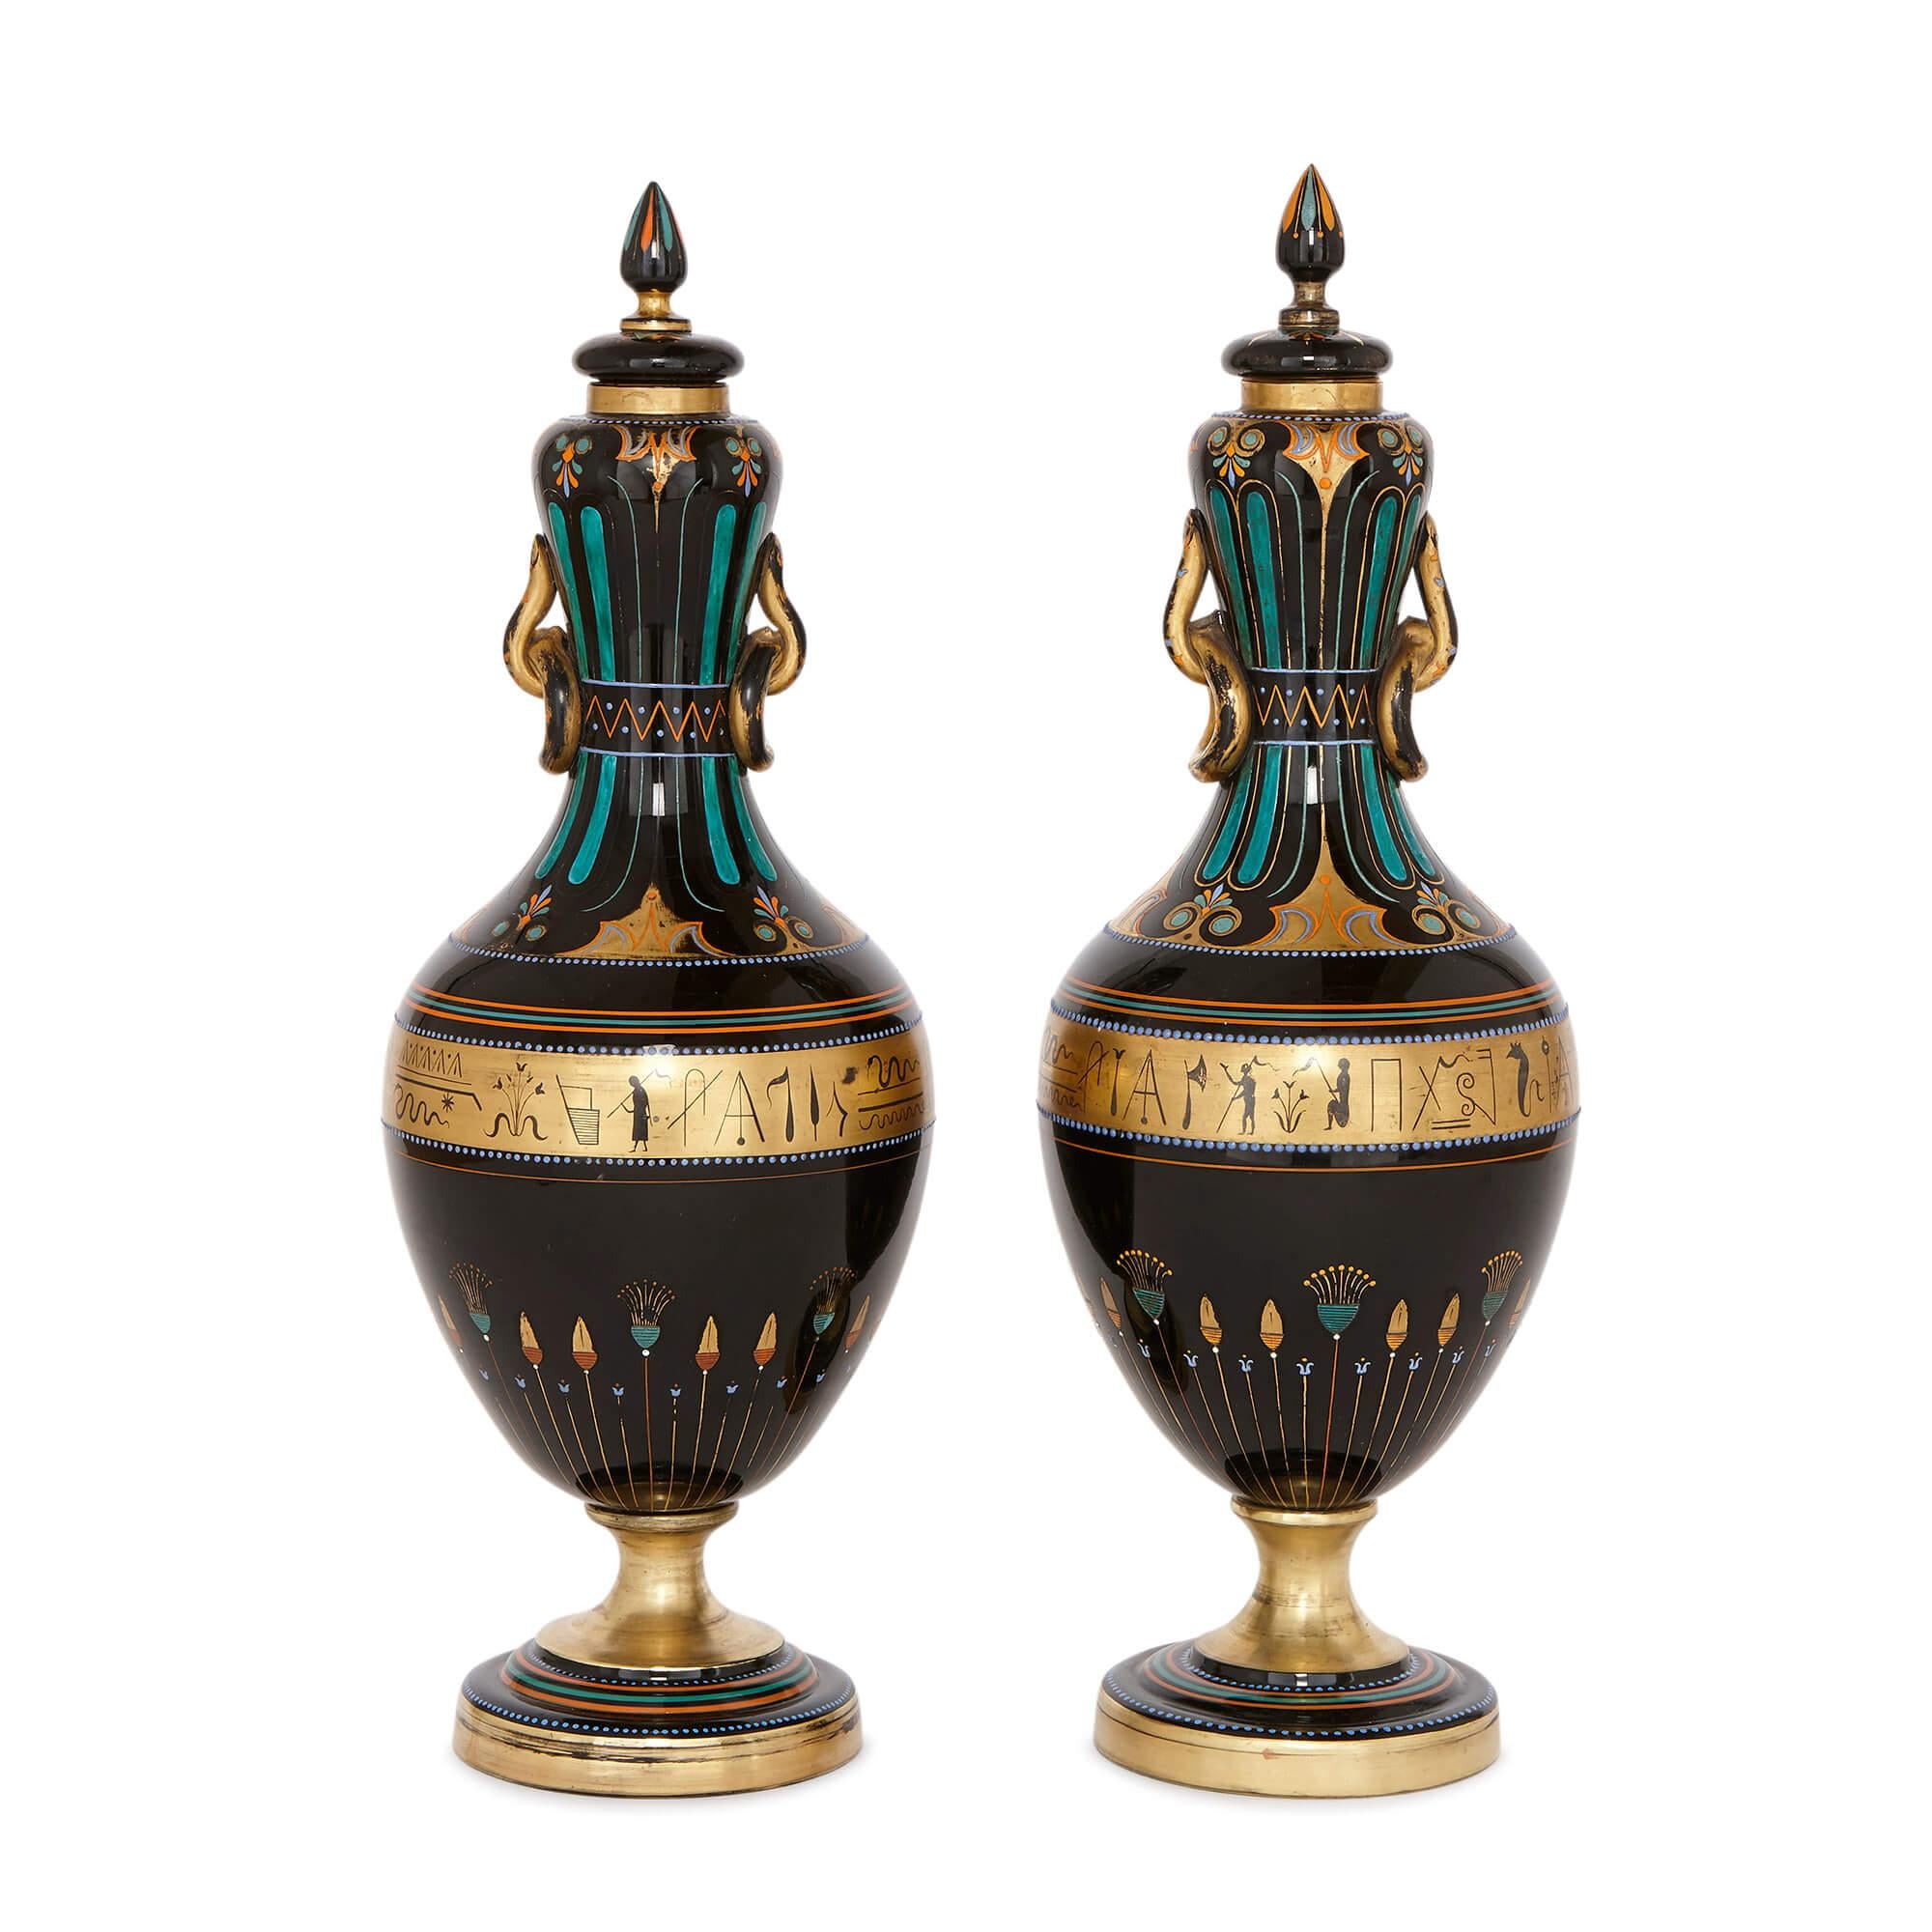 These unusual and striking Bohemian glass vases take ovoid shape, and are made from opaque black glass, called hyalithe. They are decorated in the Egyptian style. To the centre of the body of each vase is a gilt band decorated with Egyptian